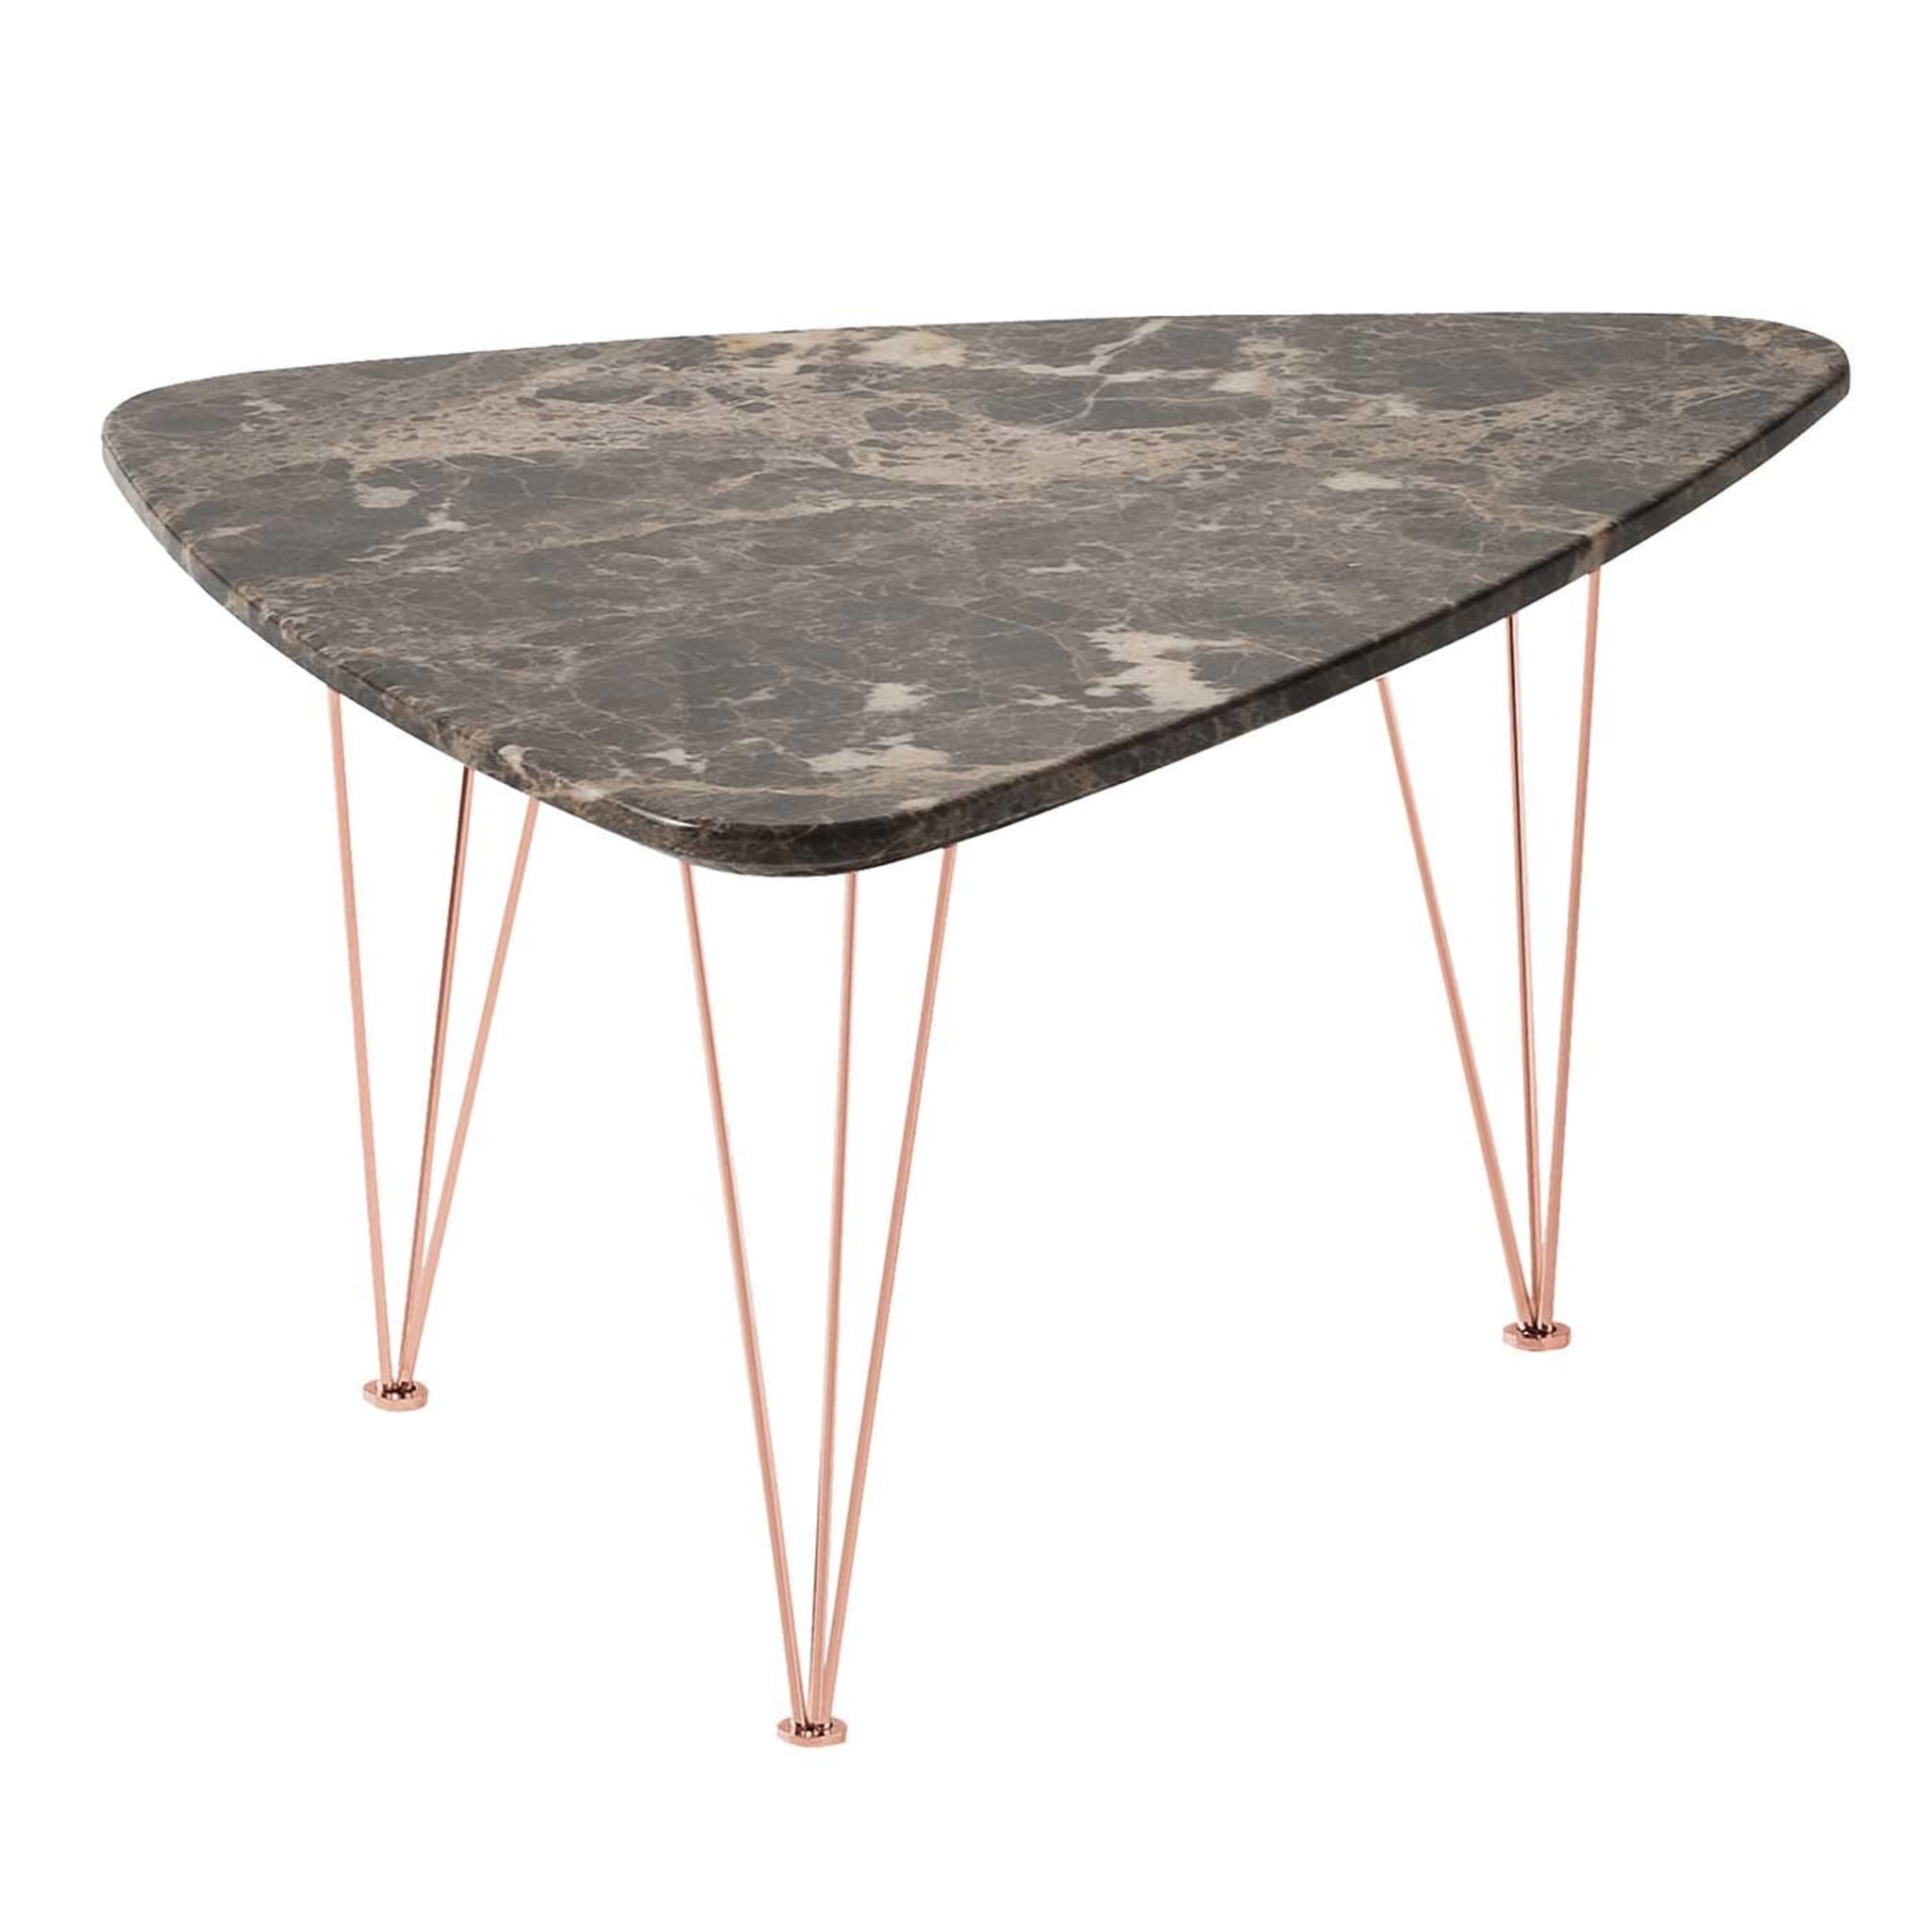 Flamingo Triangular Coffee Table with Copper Legs - Main view